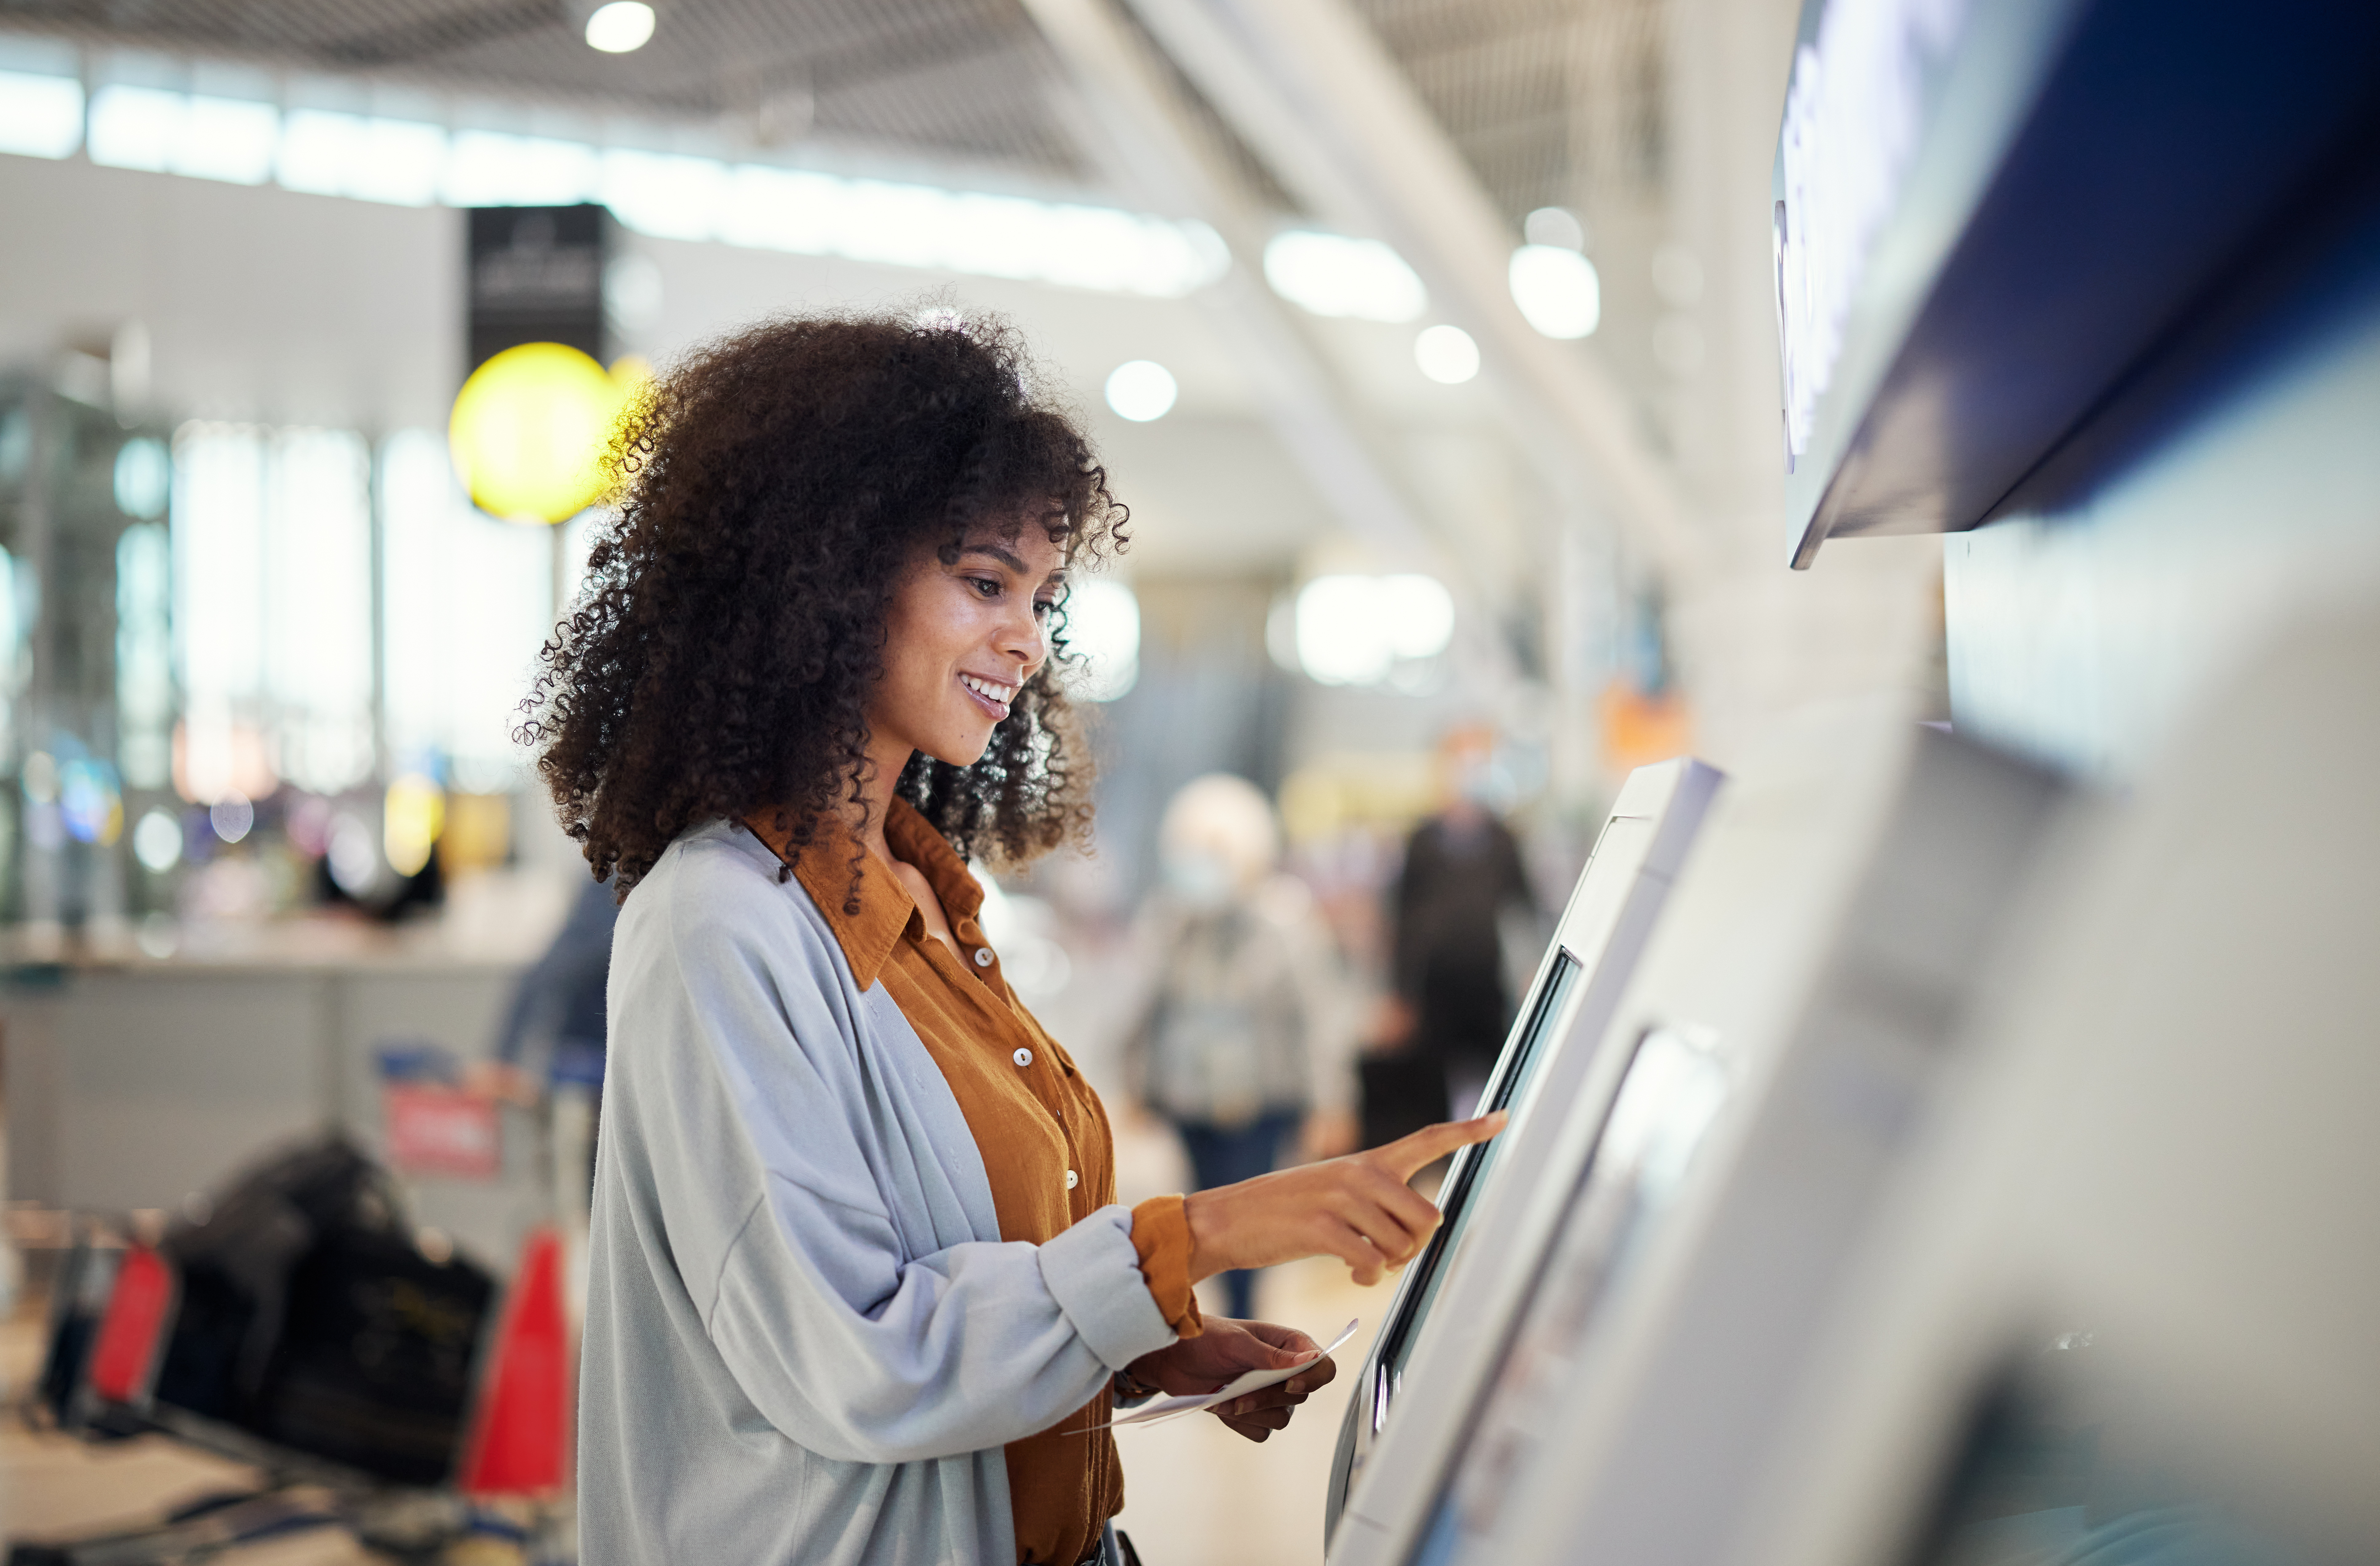 kiosk software Black woman, airport and smile by self service station for ticket, registration or boarding pass. Happy African female traveler by kiosk machine for travel application, document or booking flight